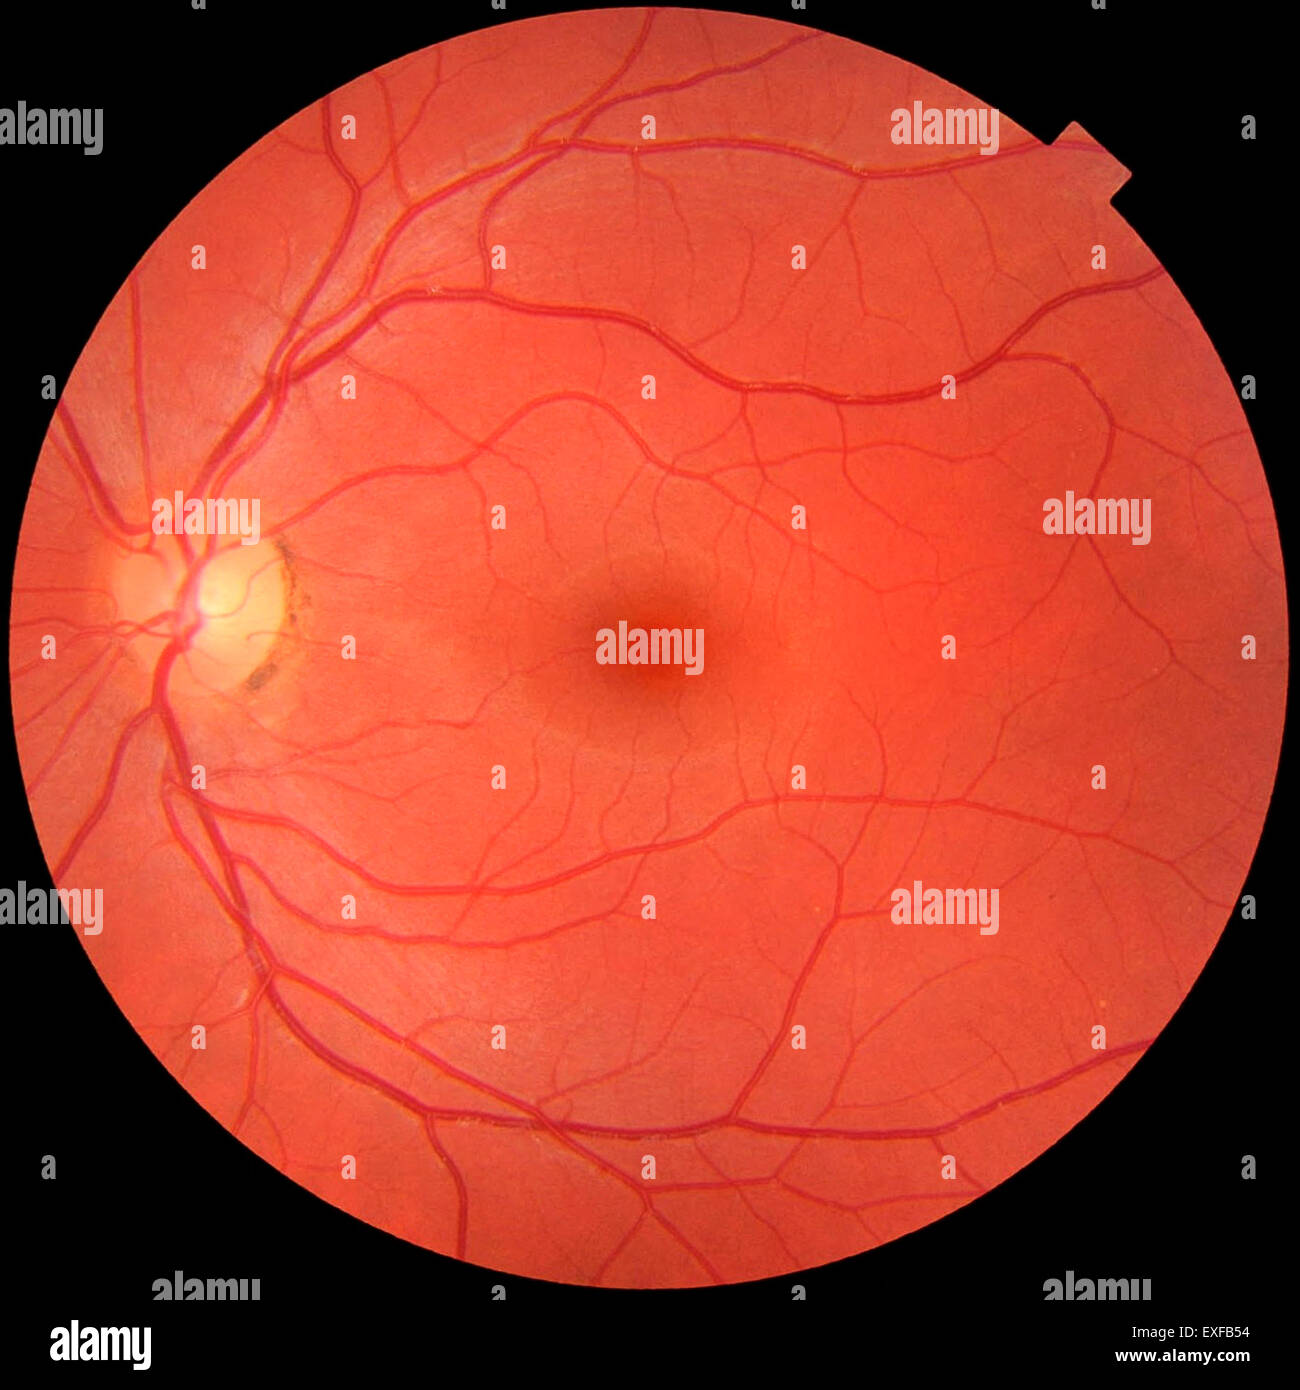 Fundus Photograph Of Normal Left Eye Macula In Centeroptic Disk Where